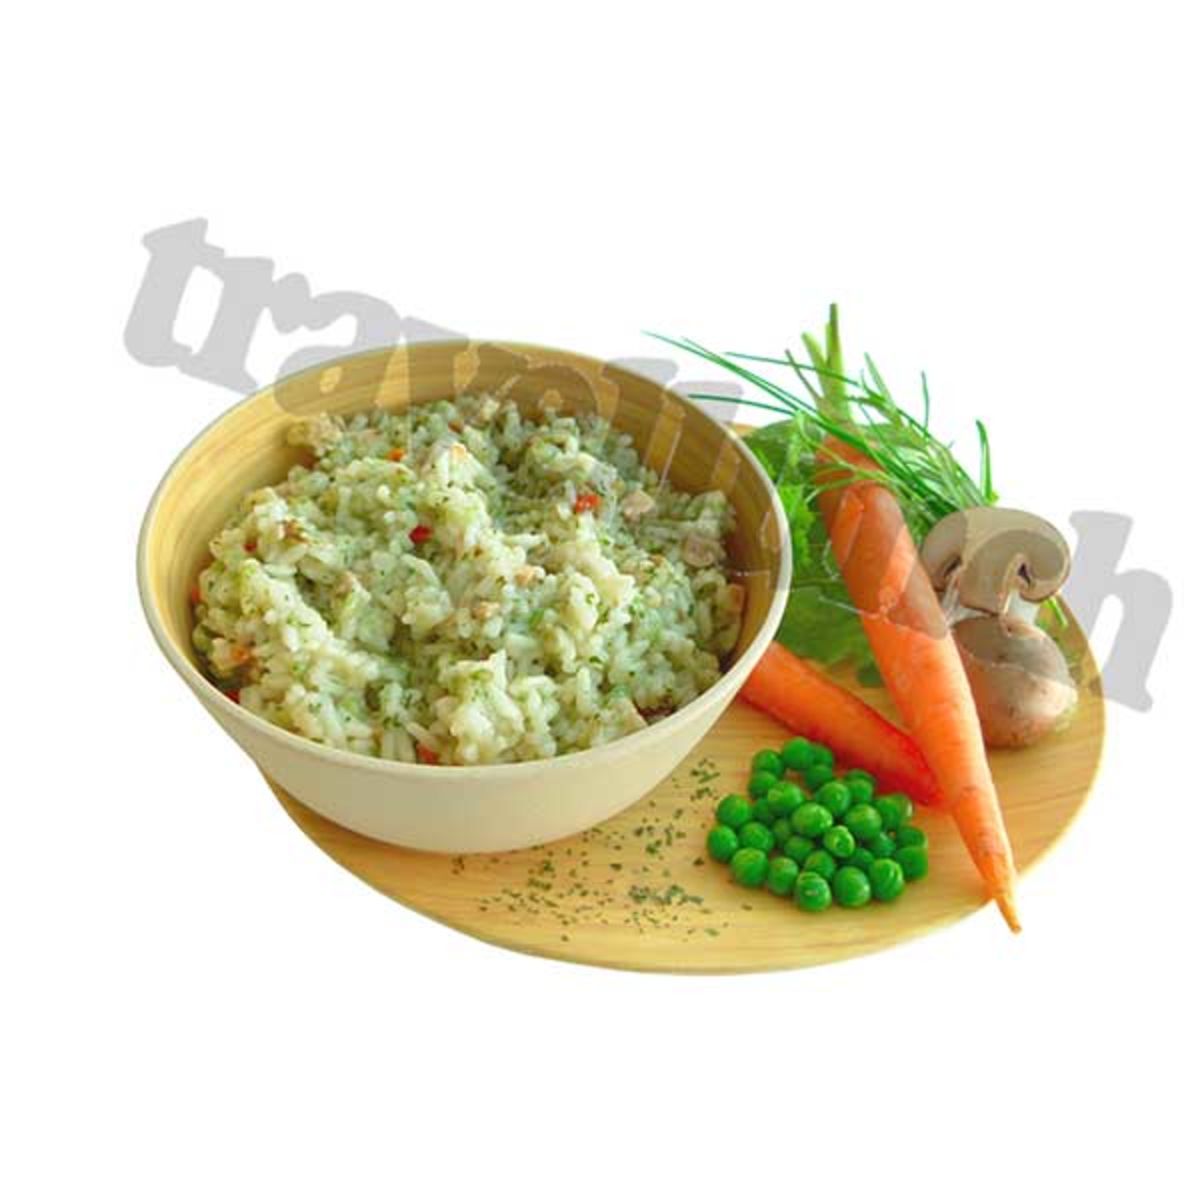 Chicken risotto with vegetables